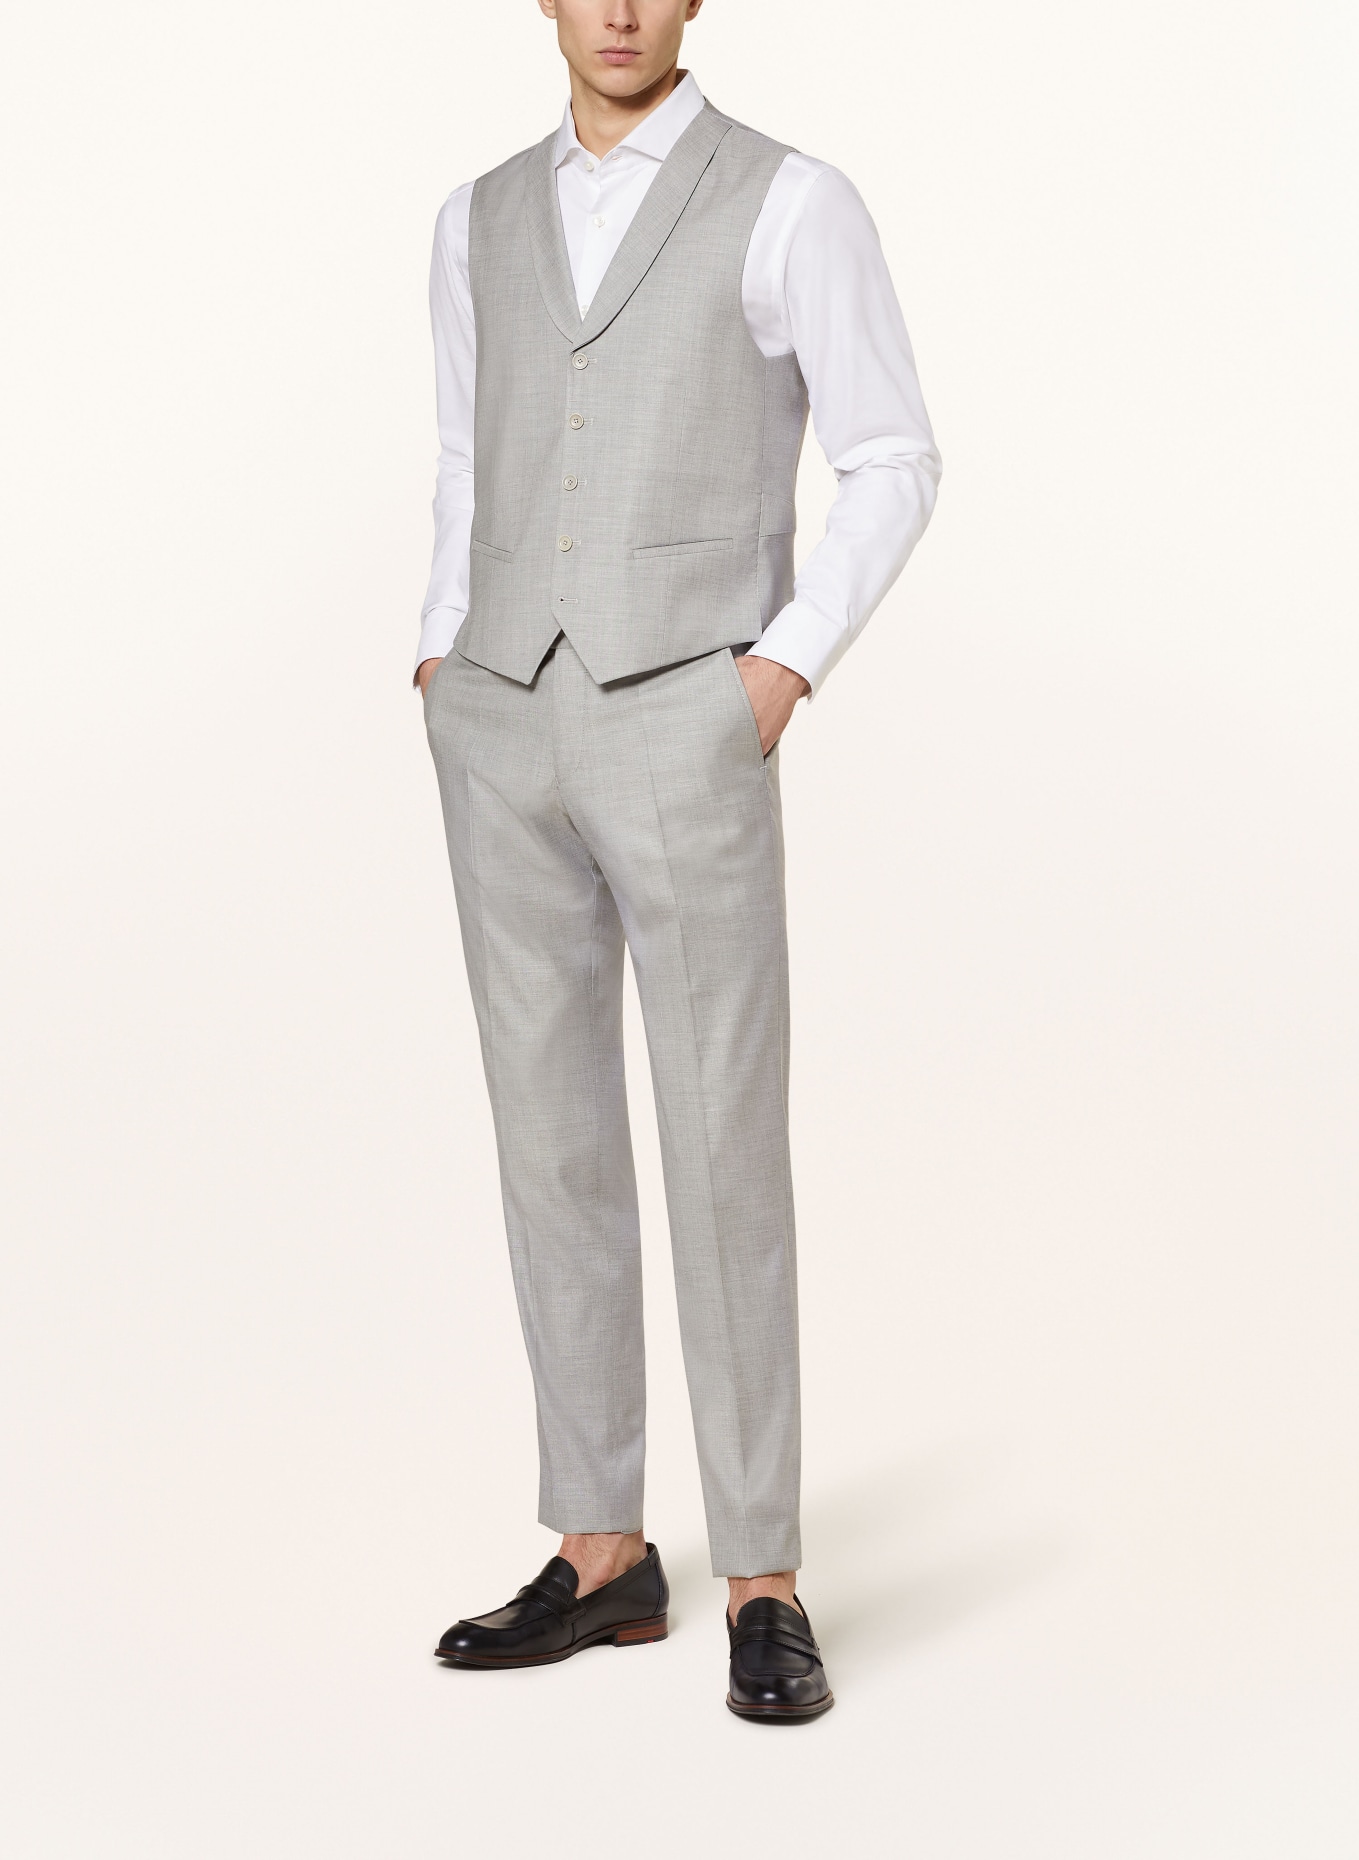 CG - CLUB of GENTS Suit vest CG PADDY extra slim fit, Color: 81 grau hell (Image 3)